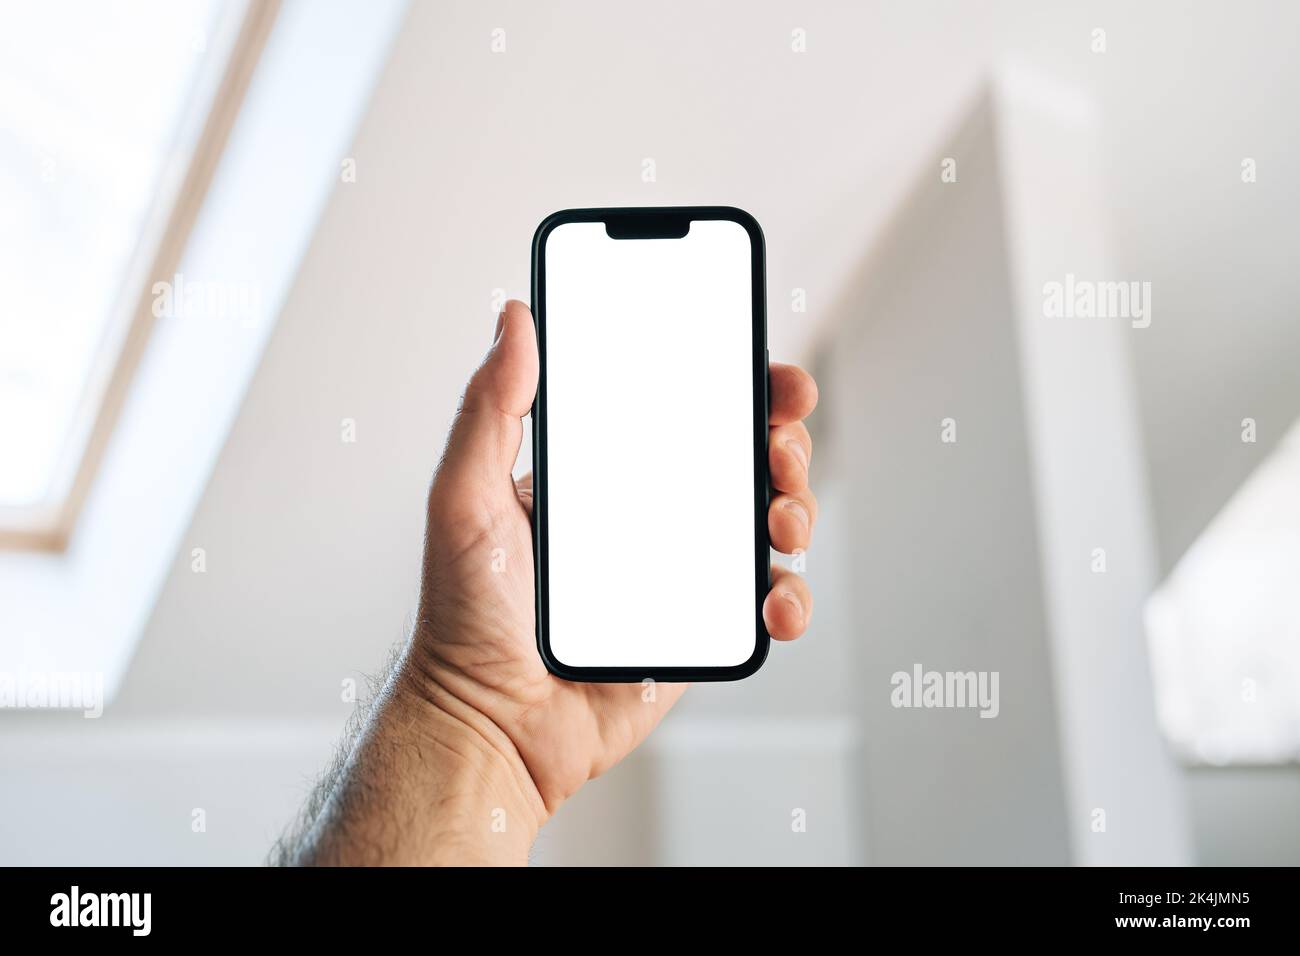 Tourist in hotel room holding smartphone with blank mockup screen for booking and reservation app or accommodation rating service Stock Photo